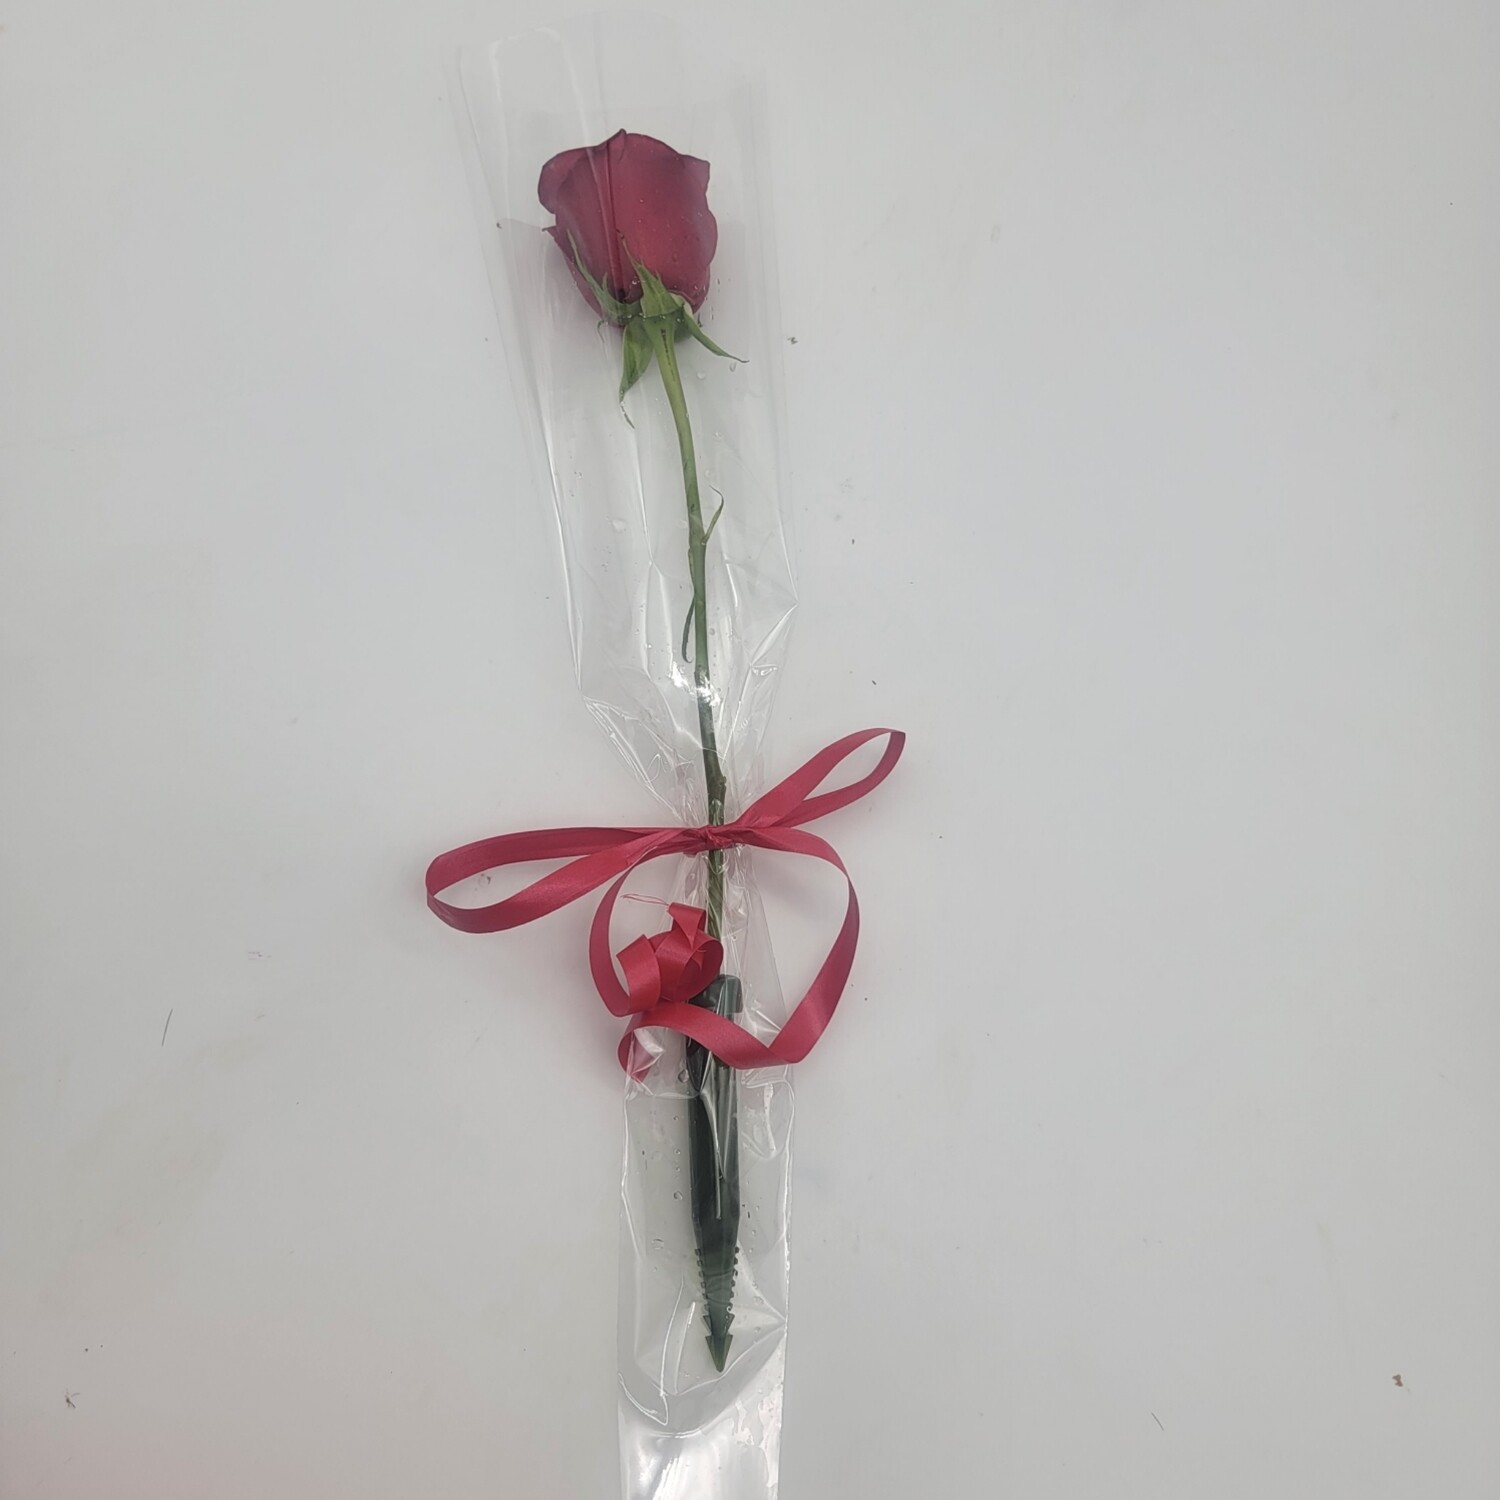 Rose - 1 in a sleeve (plain)